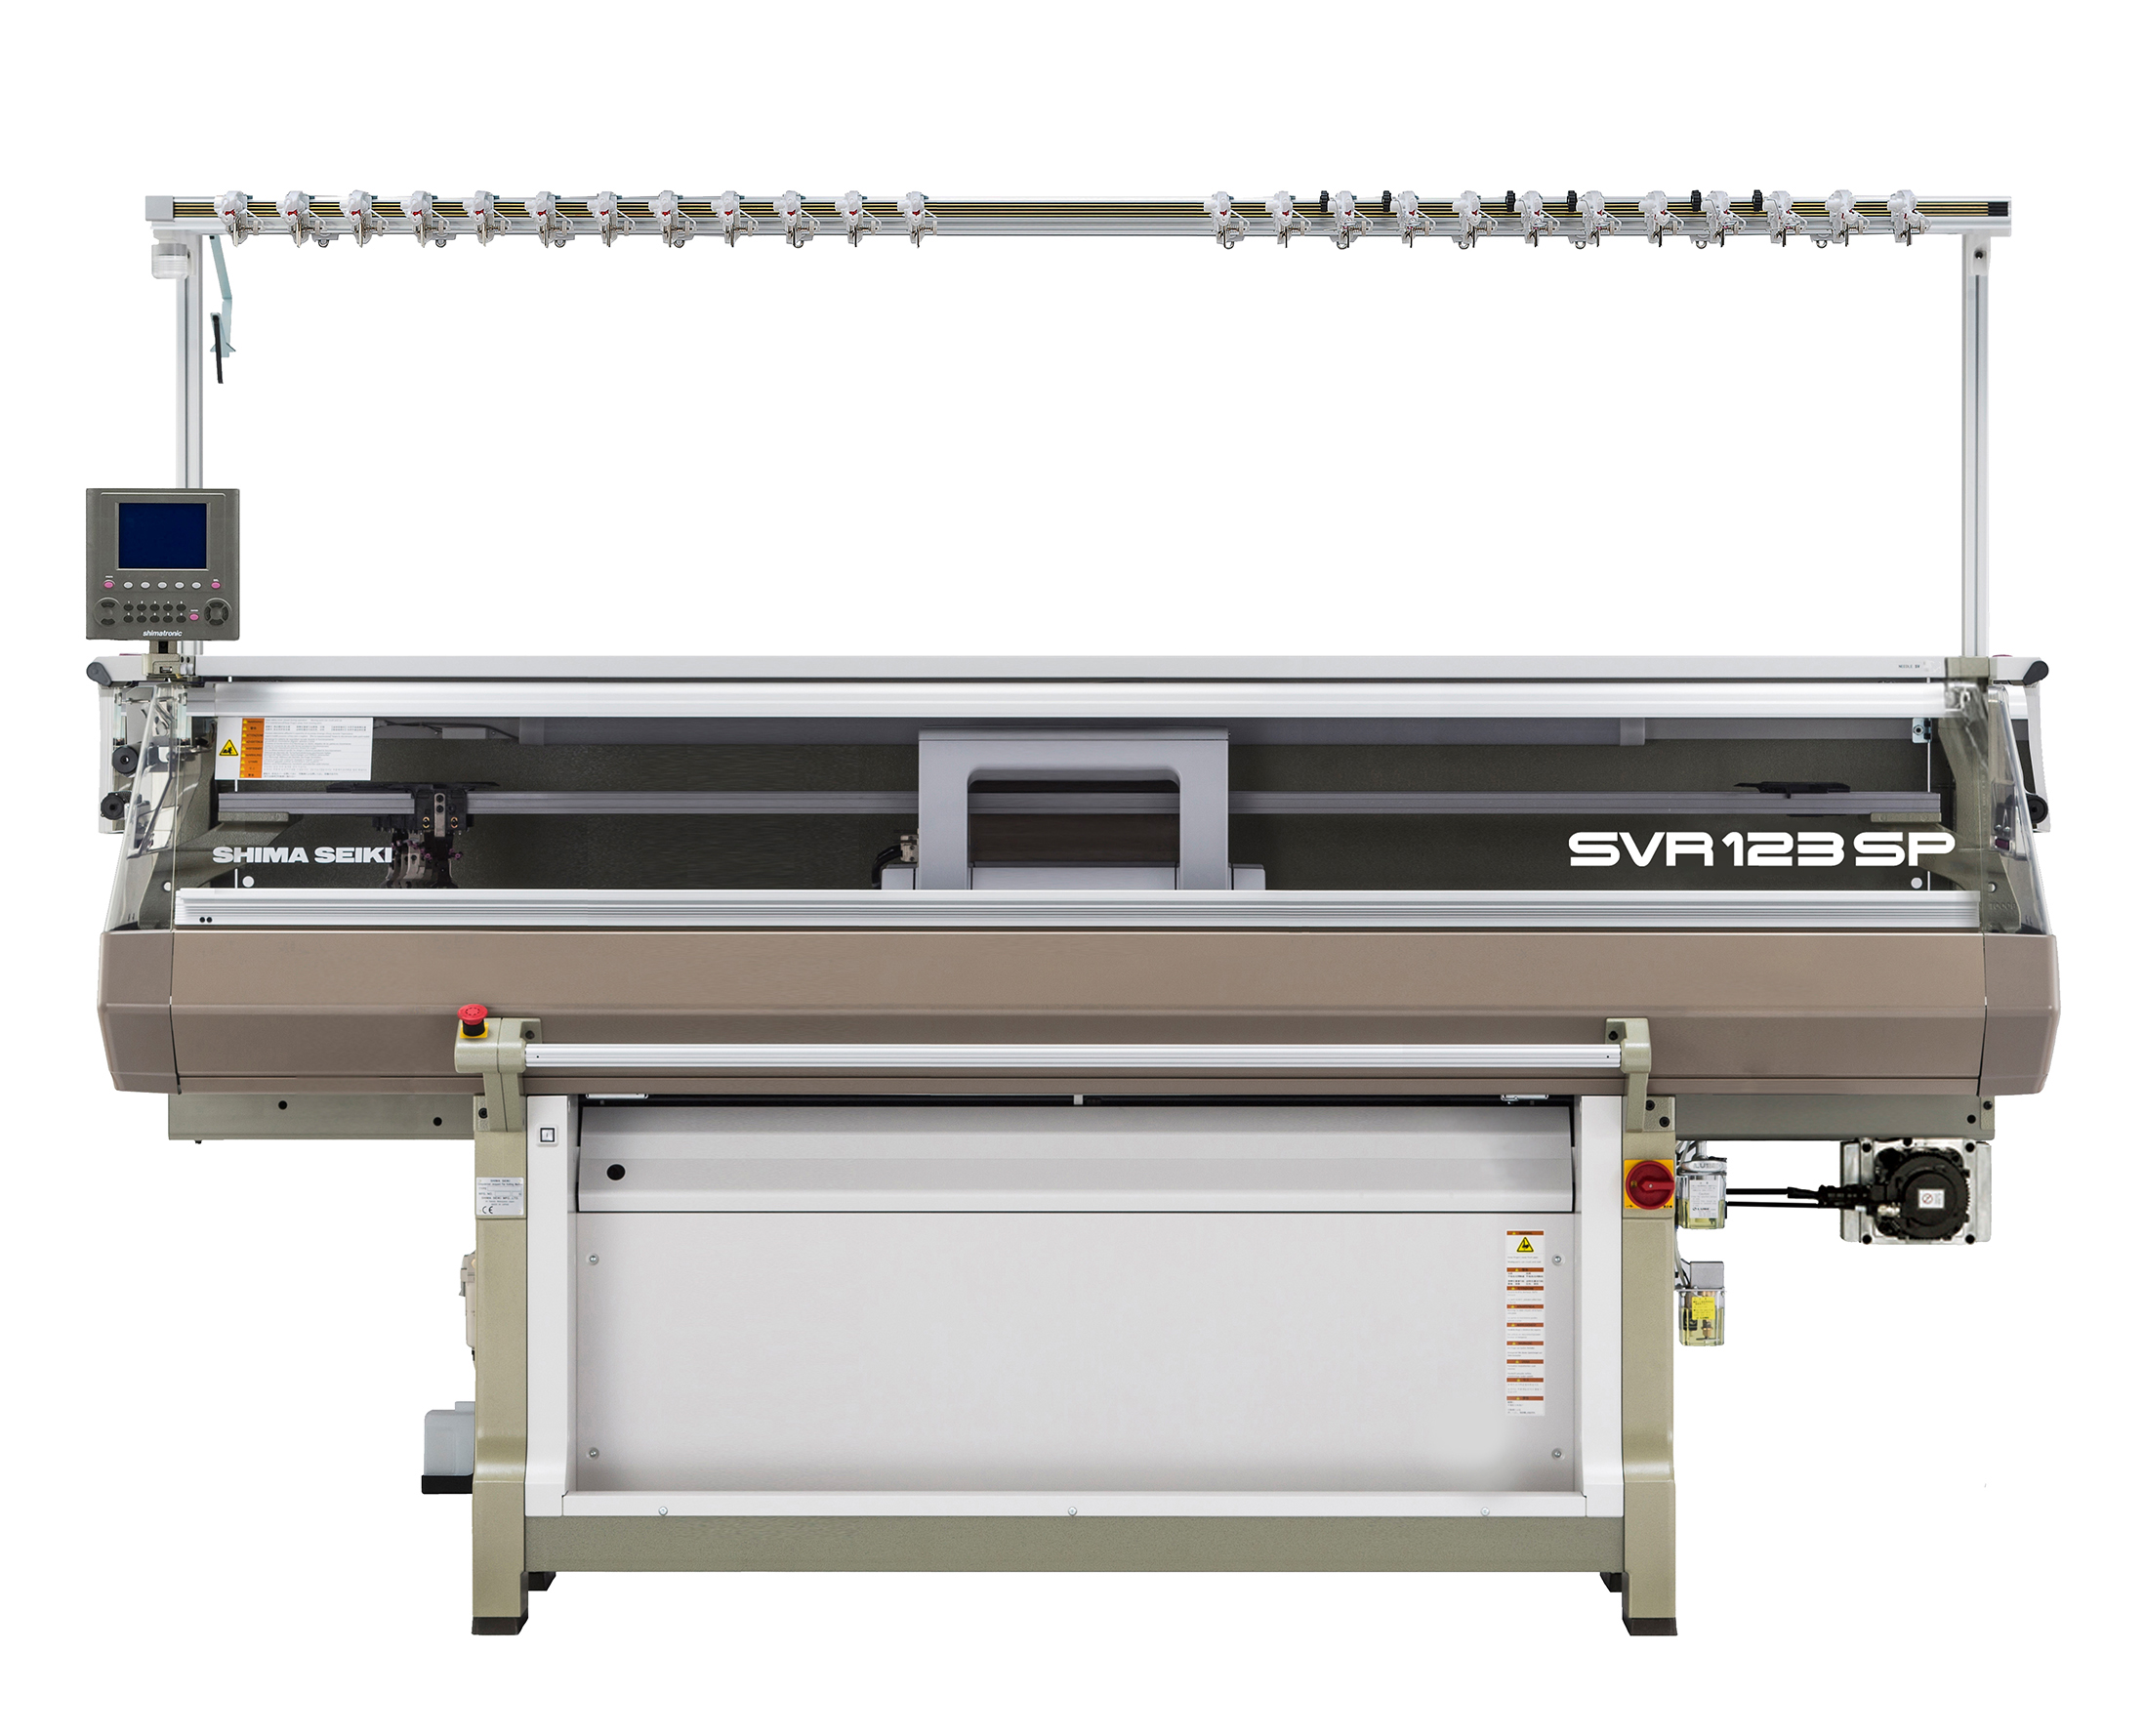 The SVR123SP also features iÂ­Plating inverseÂ­plating capability for increased patterning capability. © Shima Seiki.